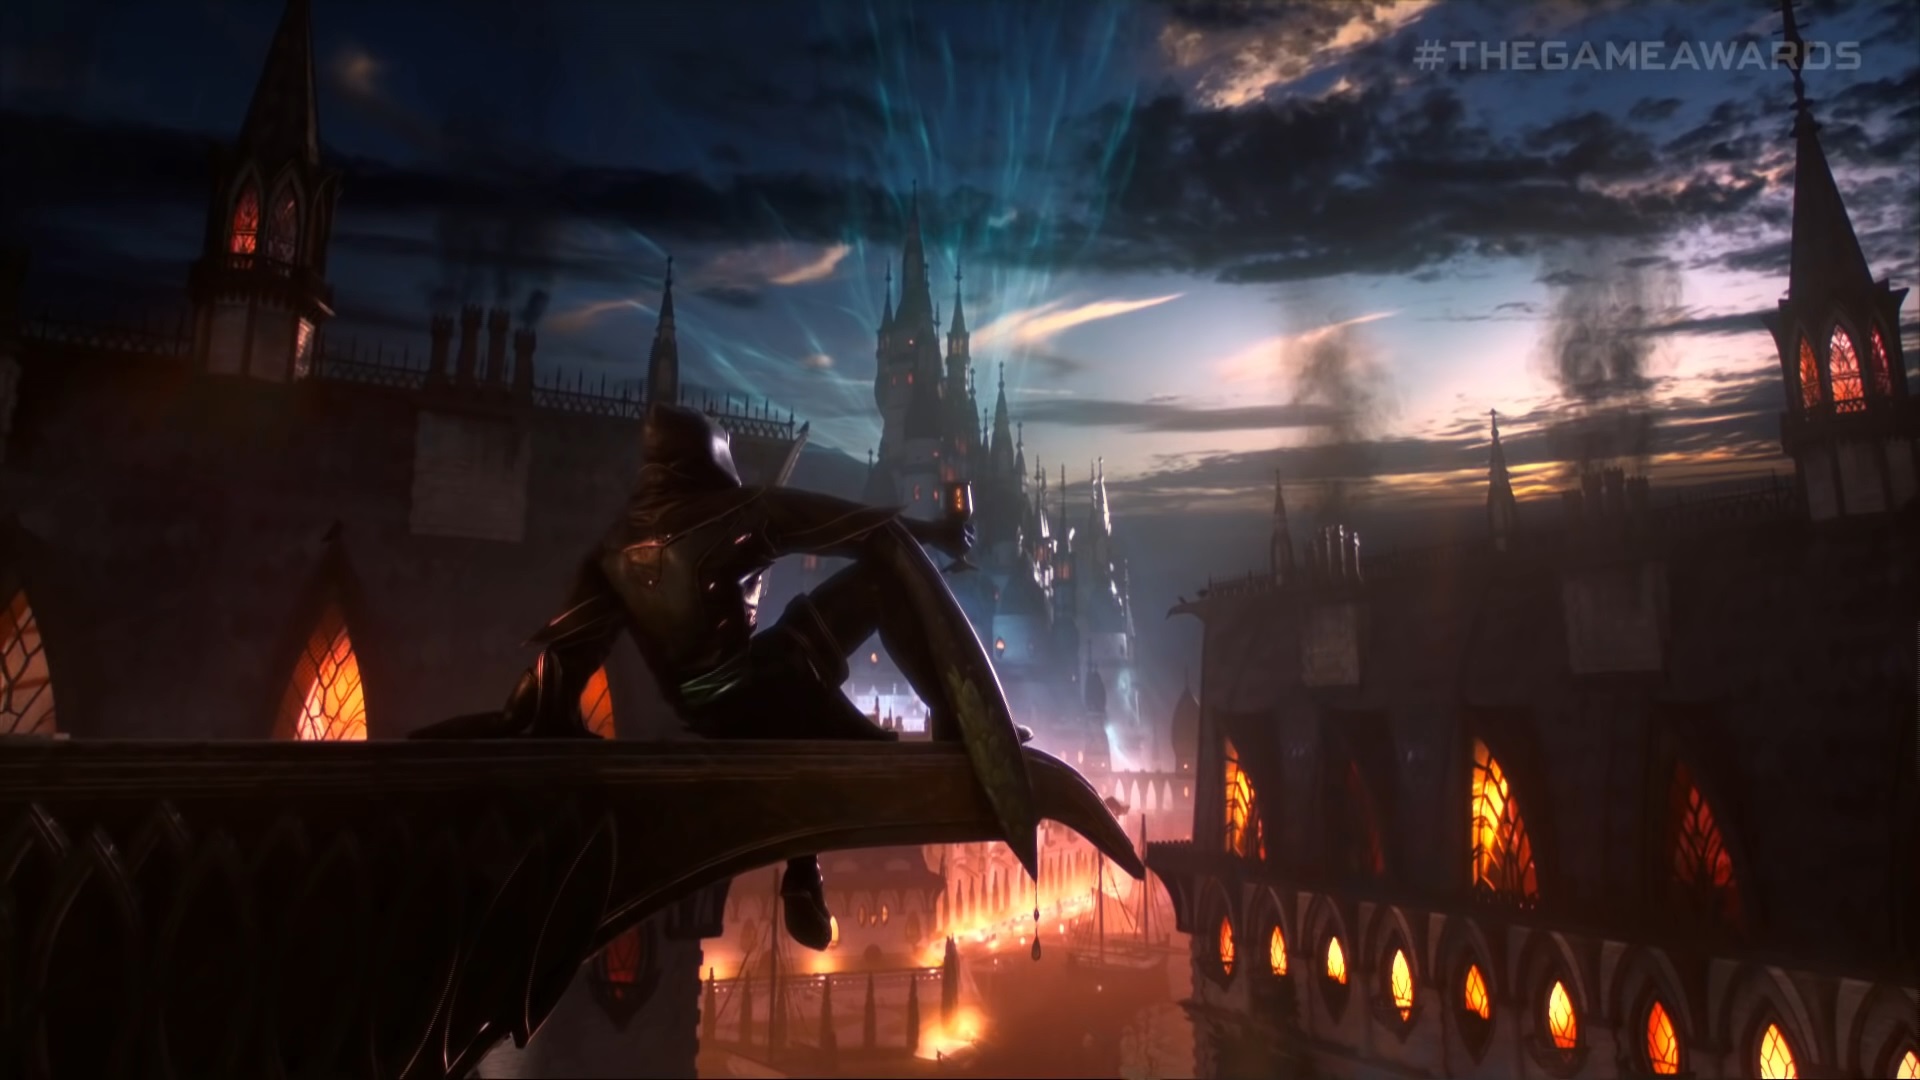 Check out 7-minutes of Gotham Knights gameplay from the pre-alpha build